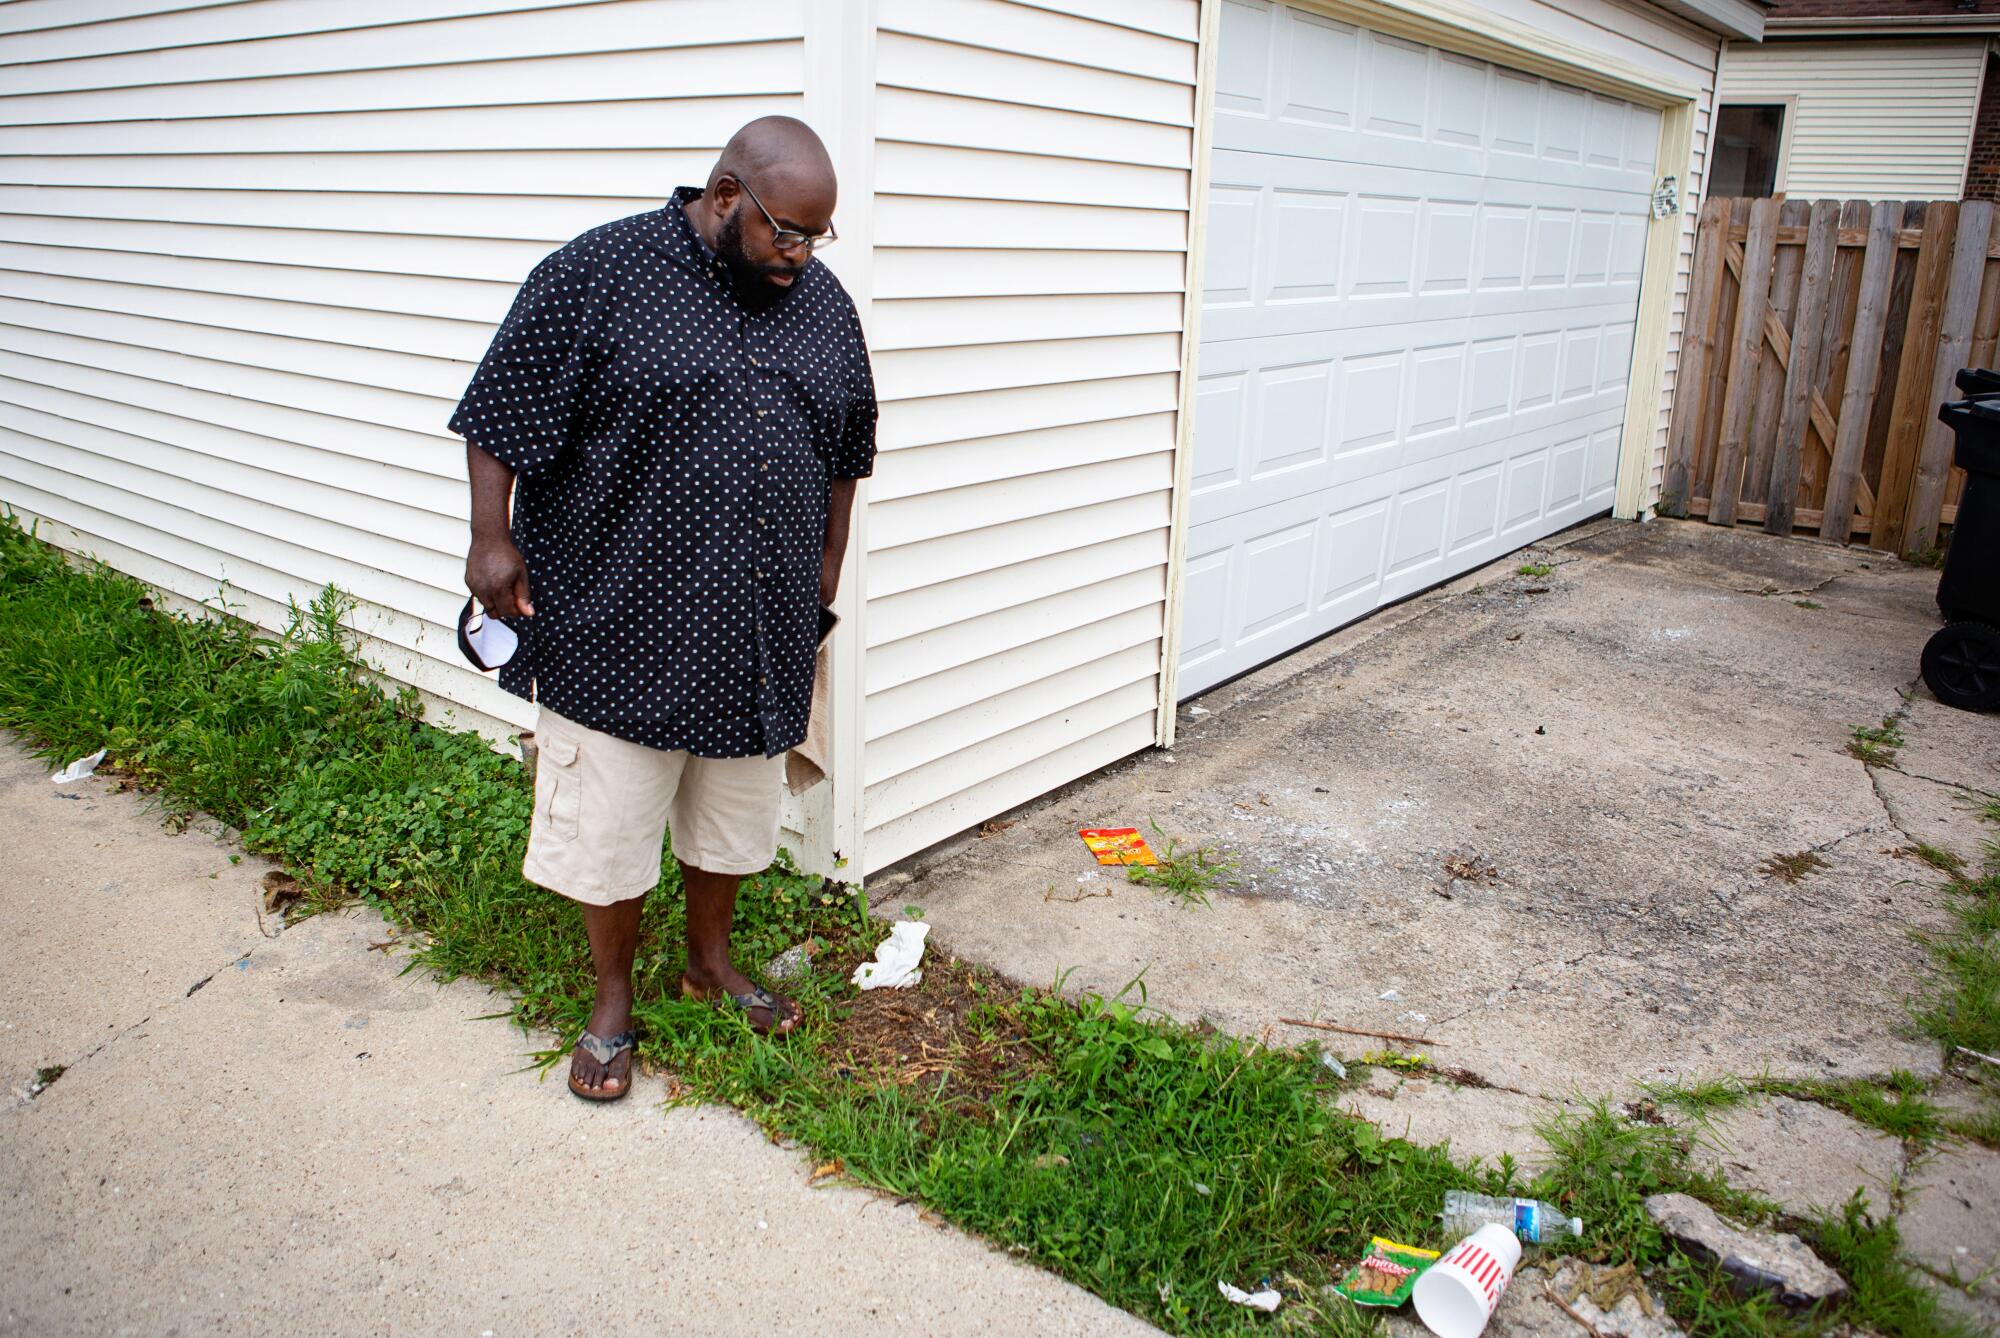 Donovan Price looks down at the spot where 9-year-old Tyshawn Lee was lured to an alley and killed.